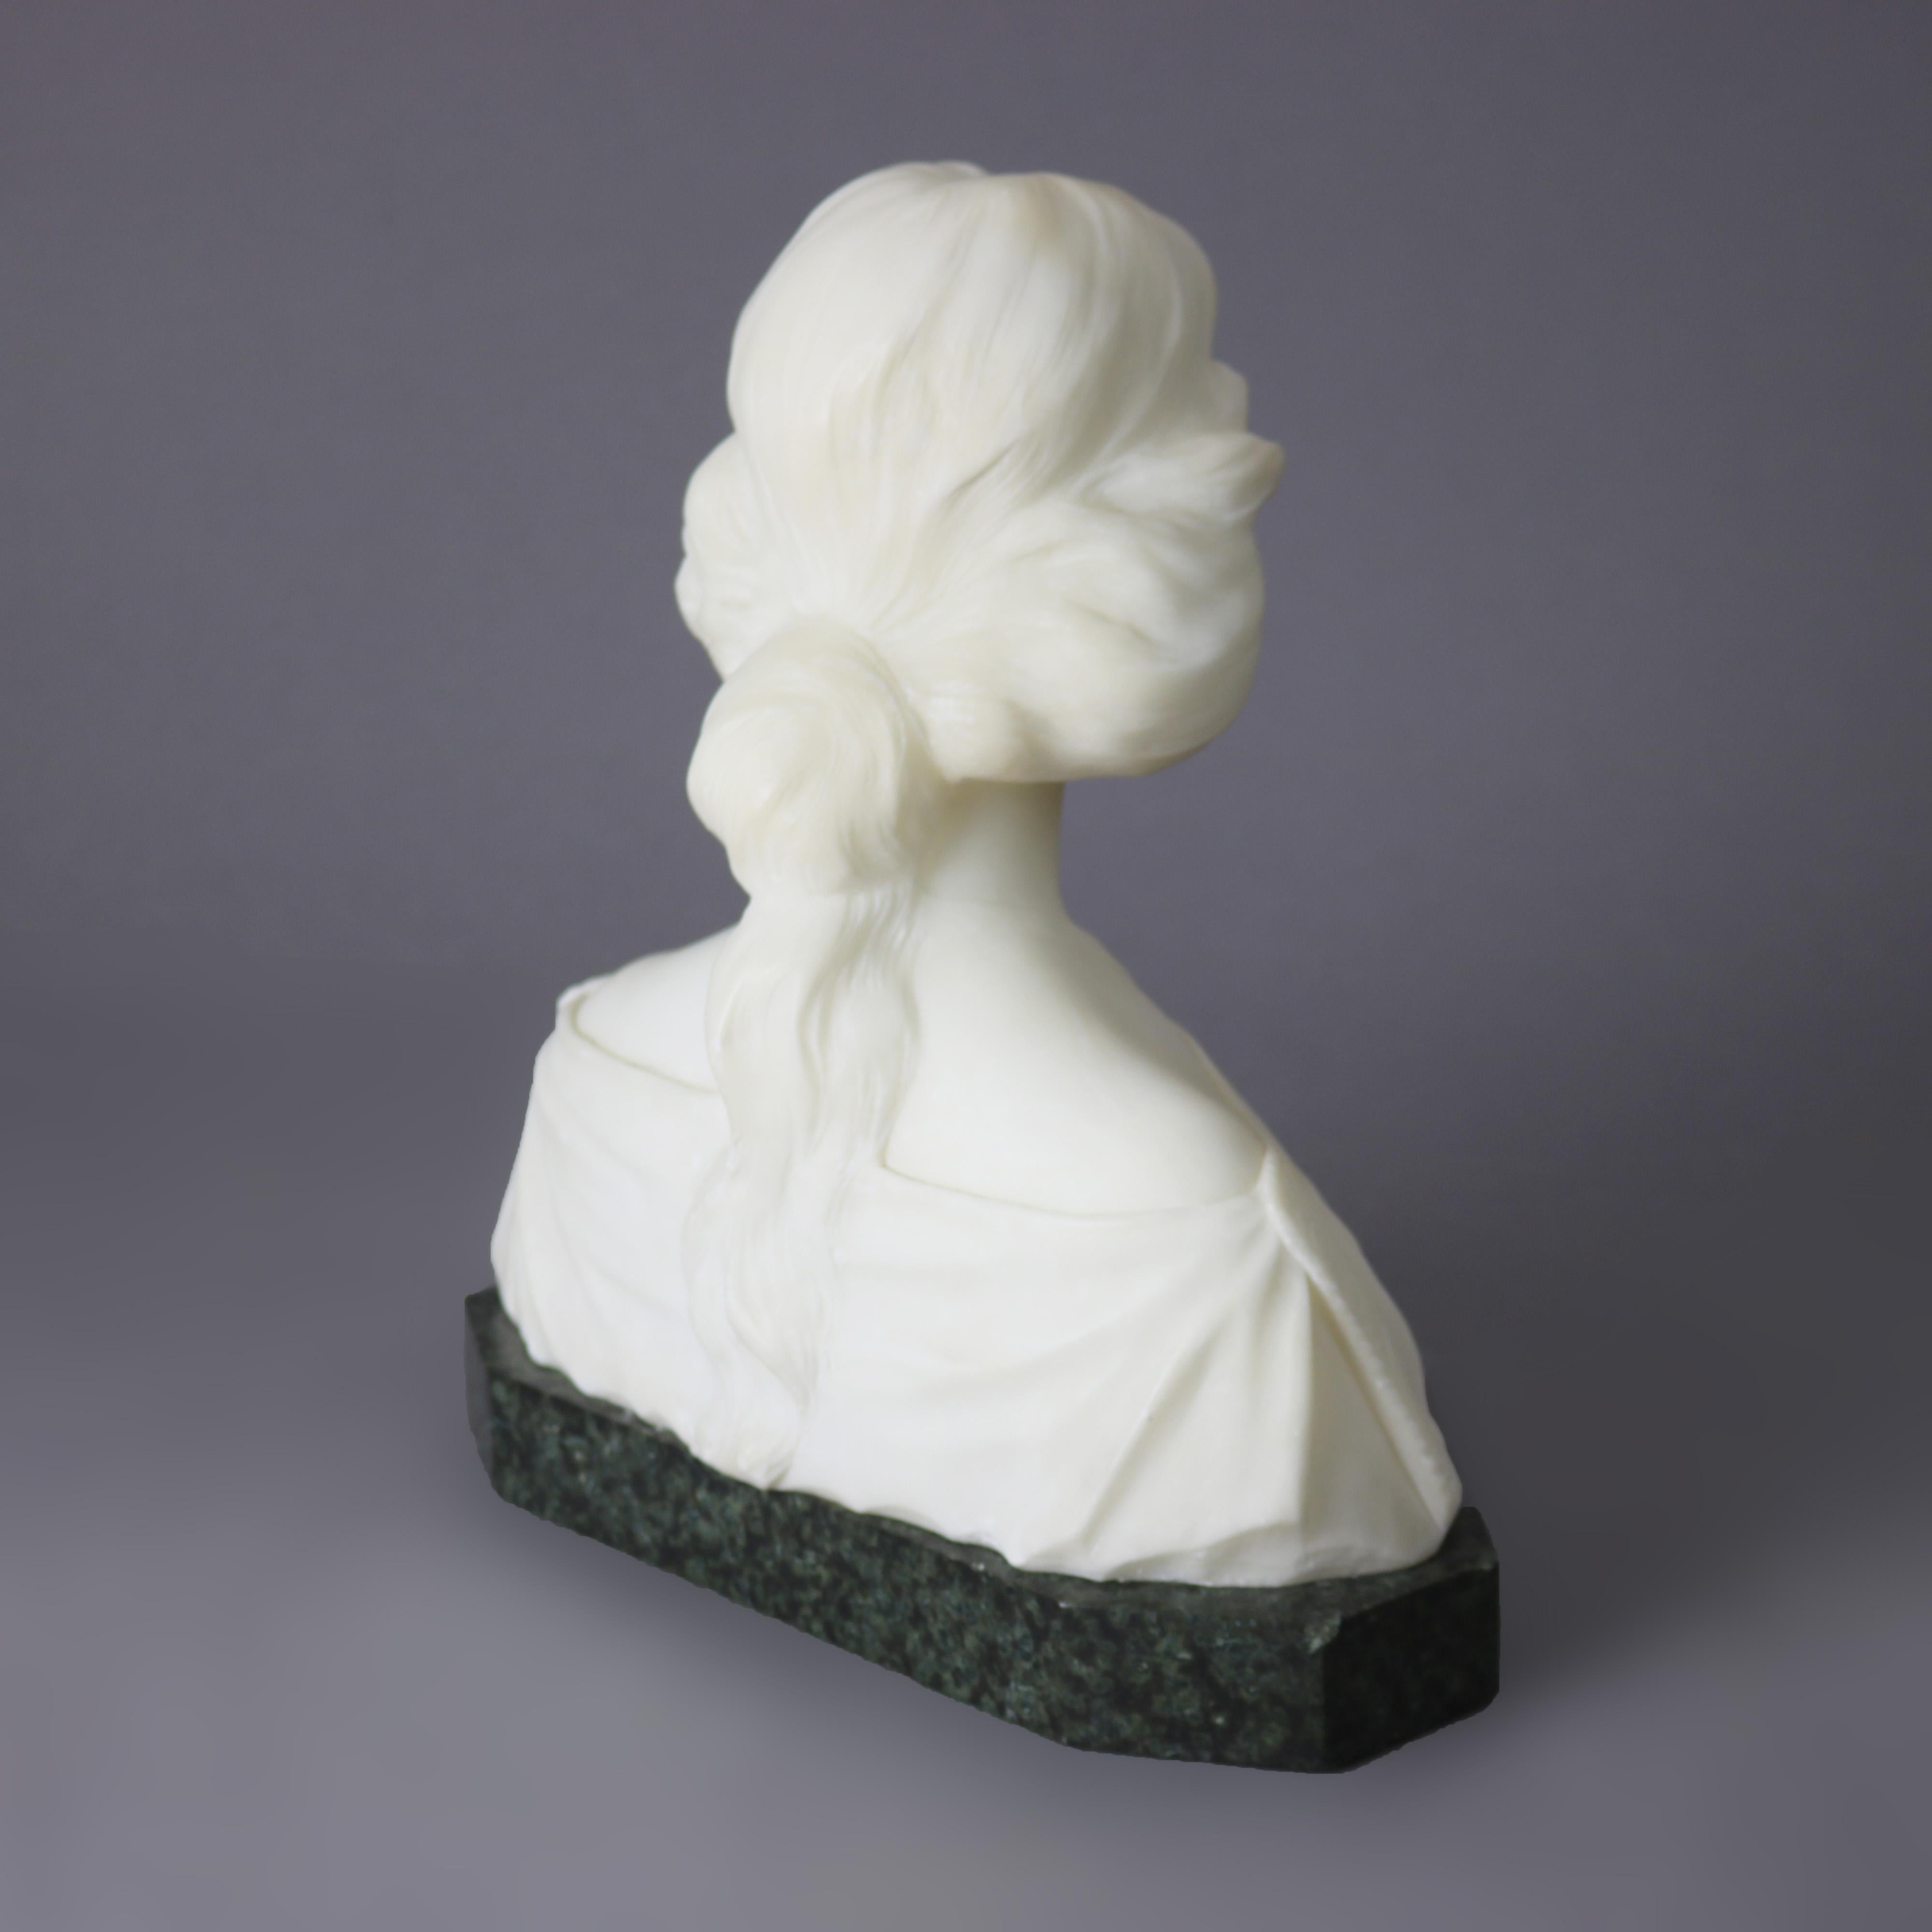 Antique Alabaster Sculpture Bust of a Woman on Black Marble Plinth, circa 1890 4